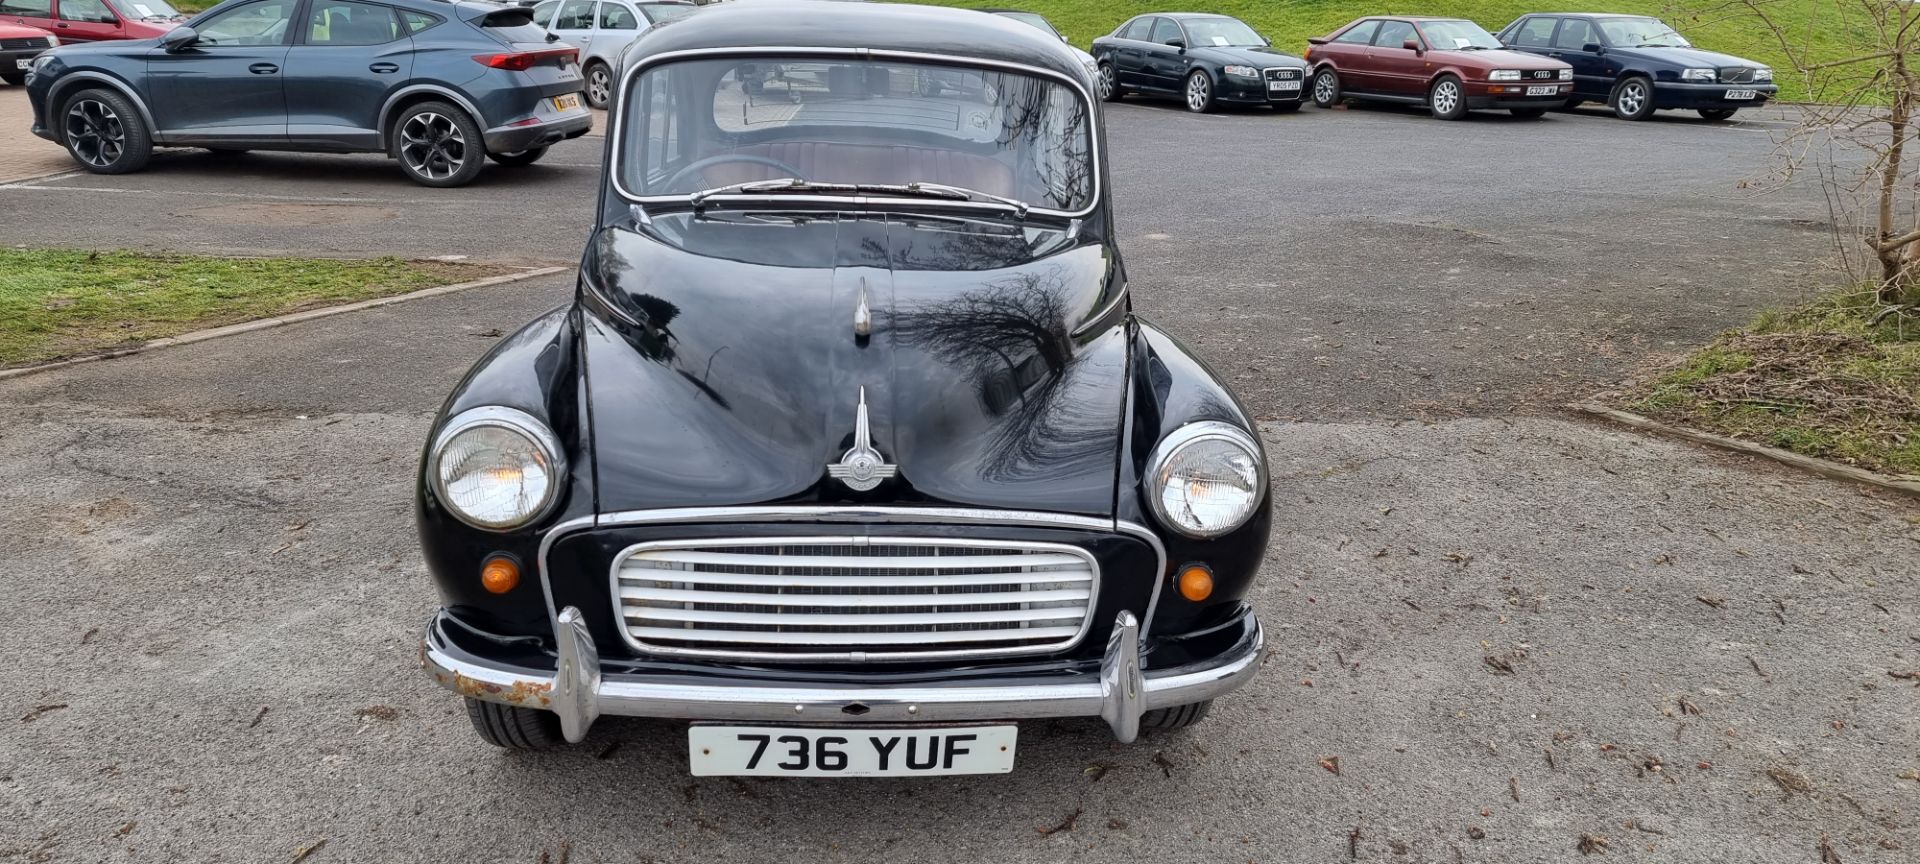 1958 Morris Minor, 948cc. Registration number 736 YUF (non transferrable). - Image 3 of 19